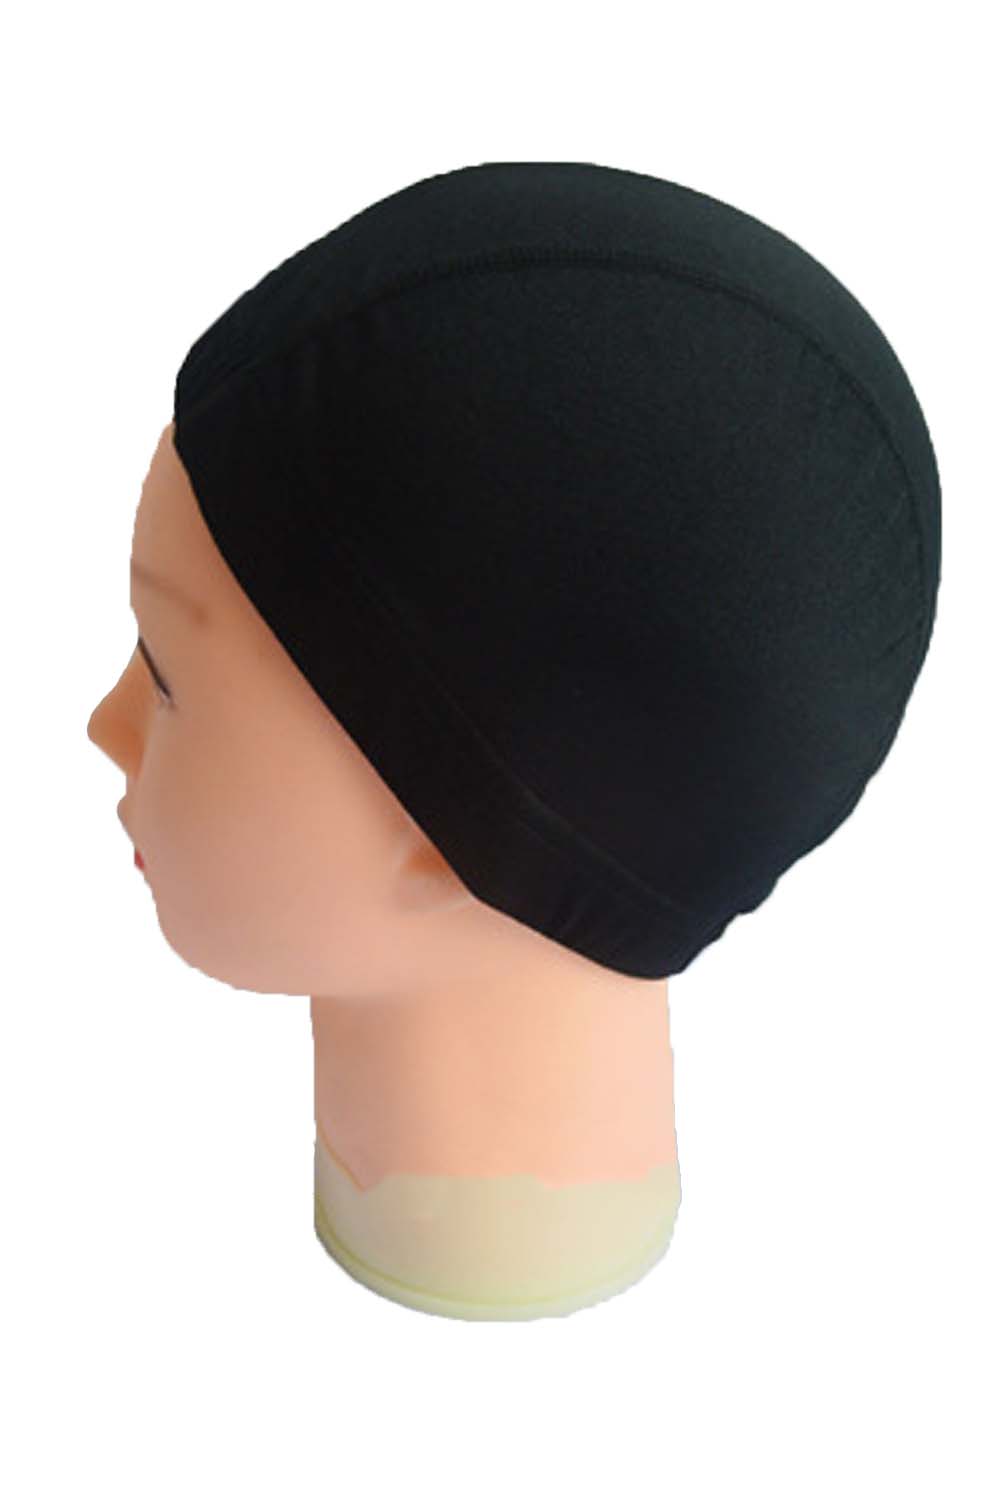 ventilated-dome-cap-diy-making-your-own-wig-accessories-side